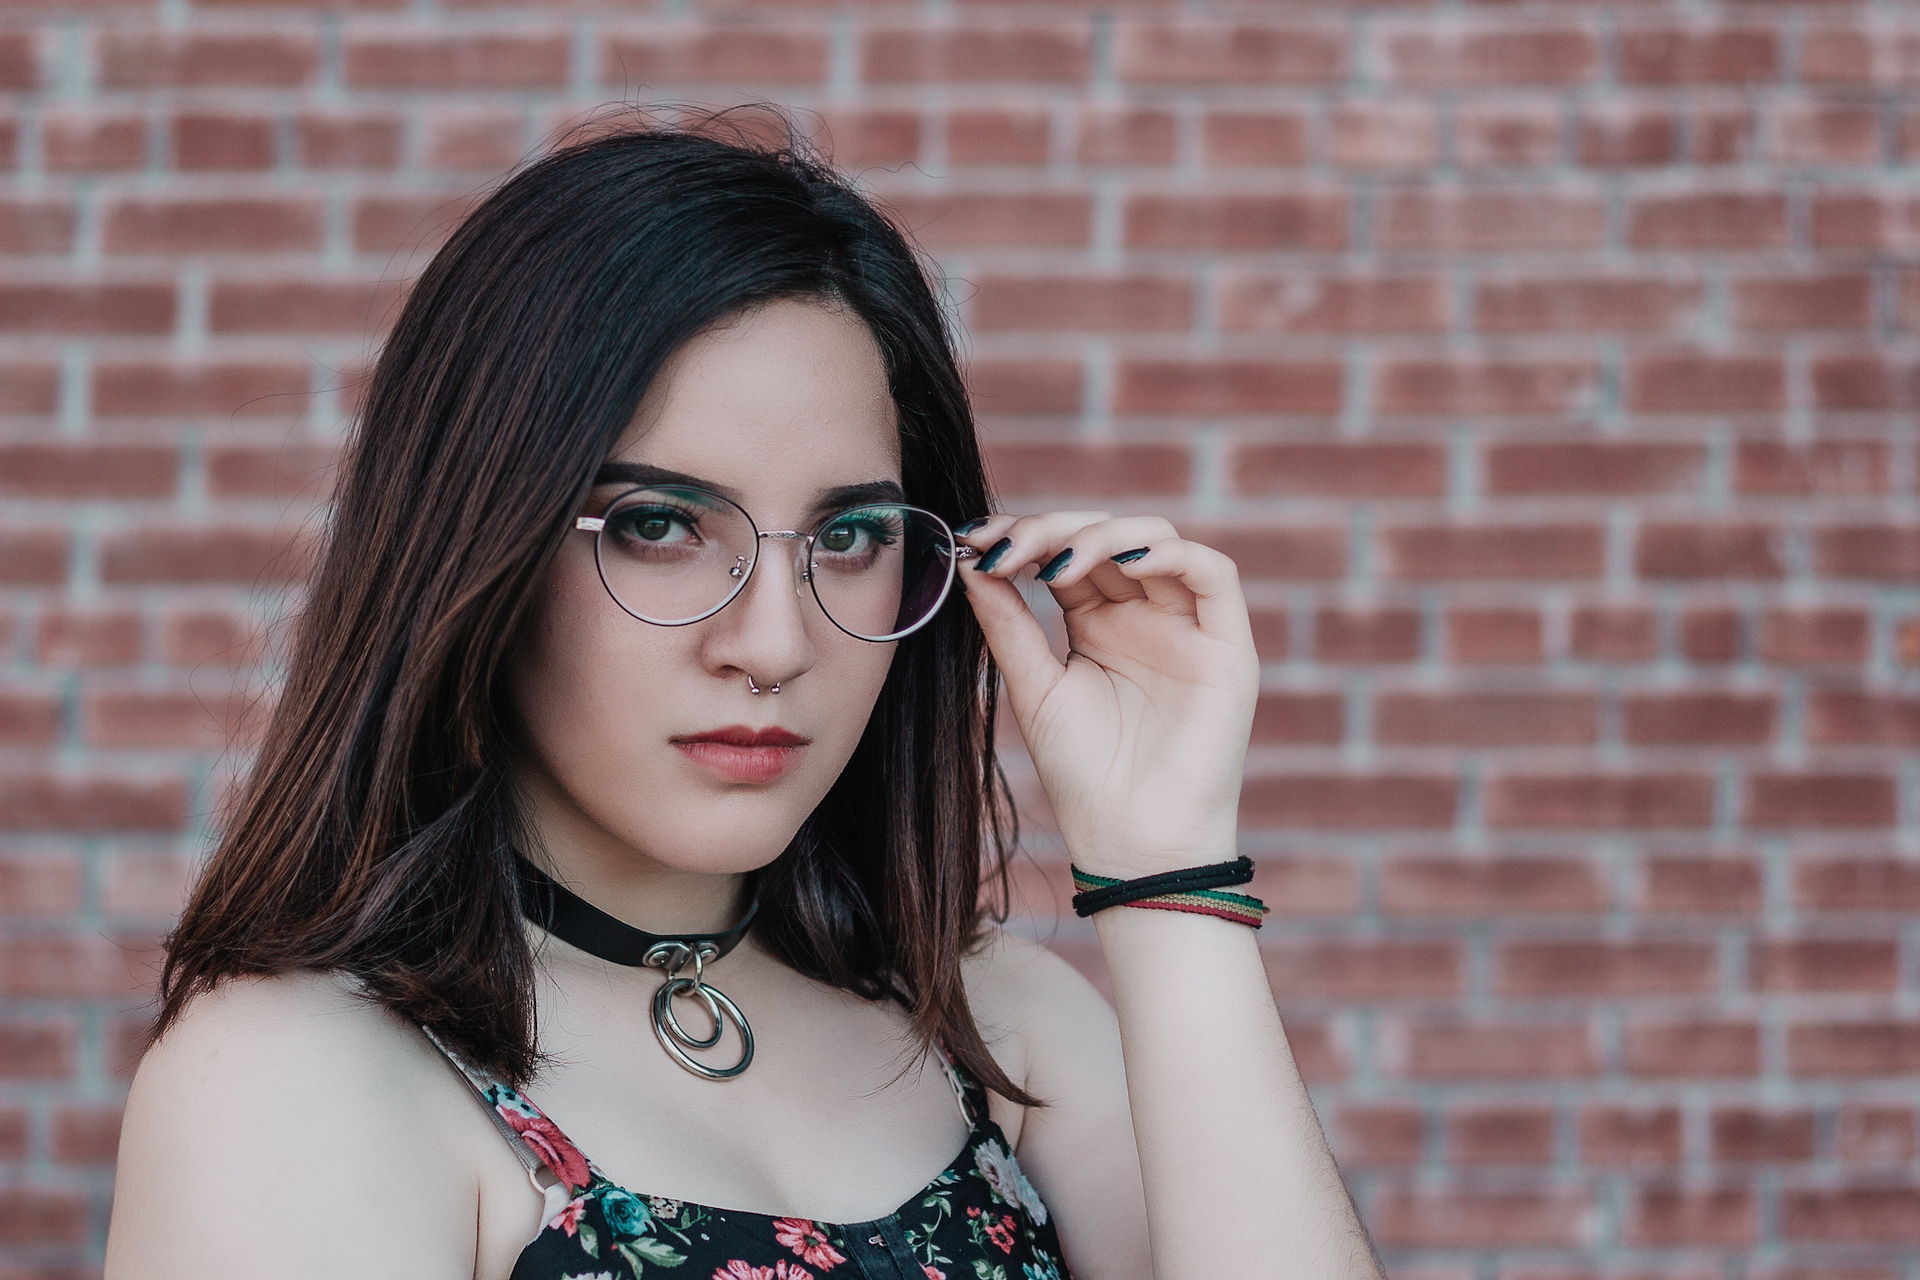 Cero Grey Women Model Urban Young Woman Women With Glasses Dark Hair Glasses Nose Ring Nose Rings Fa 1920x1280